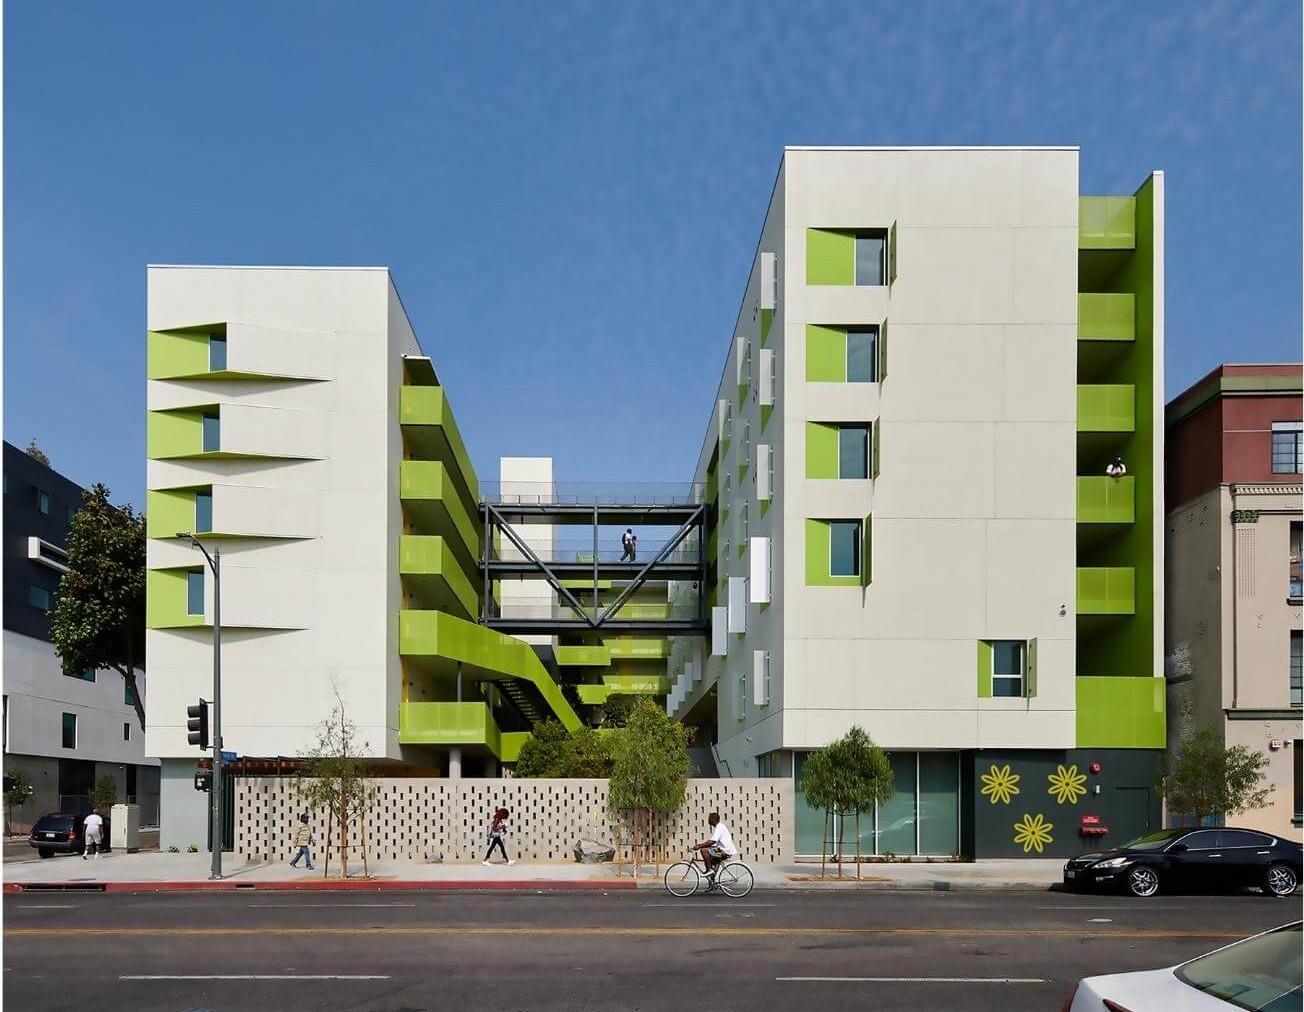 view of an afforable multifamily housing complex in la